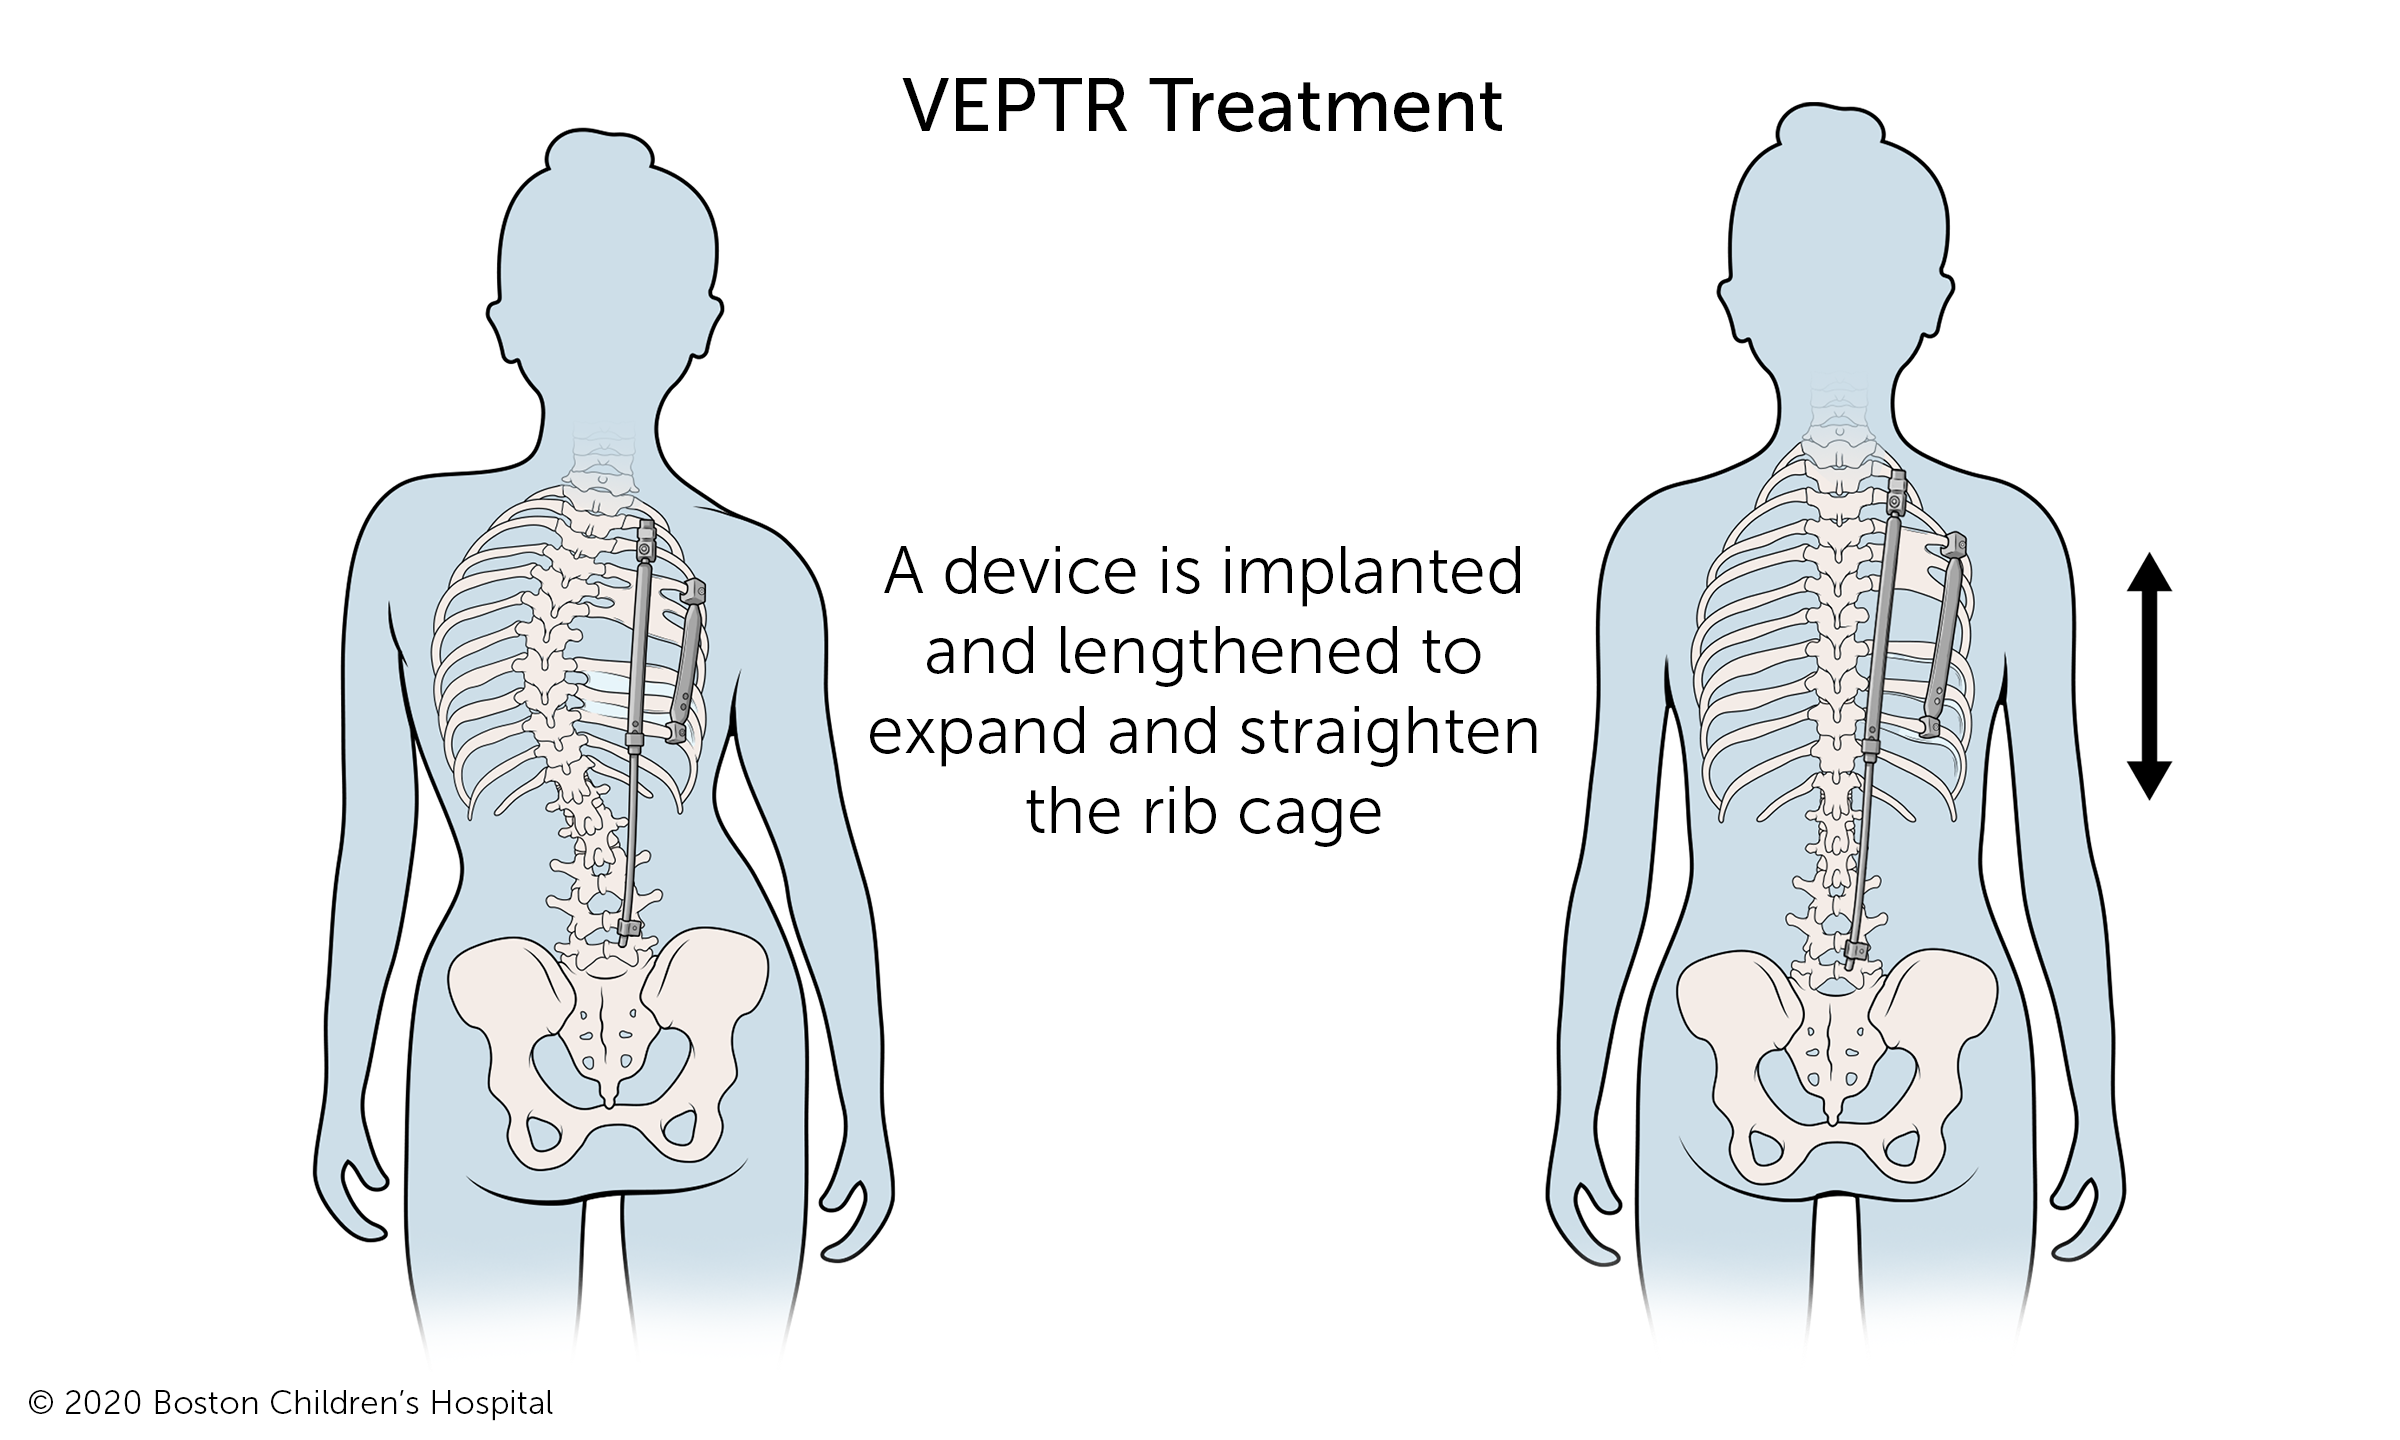 VEPTR™ treatment: A device is implanted and lengthened to expand and straighten the rib cage.